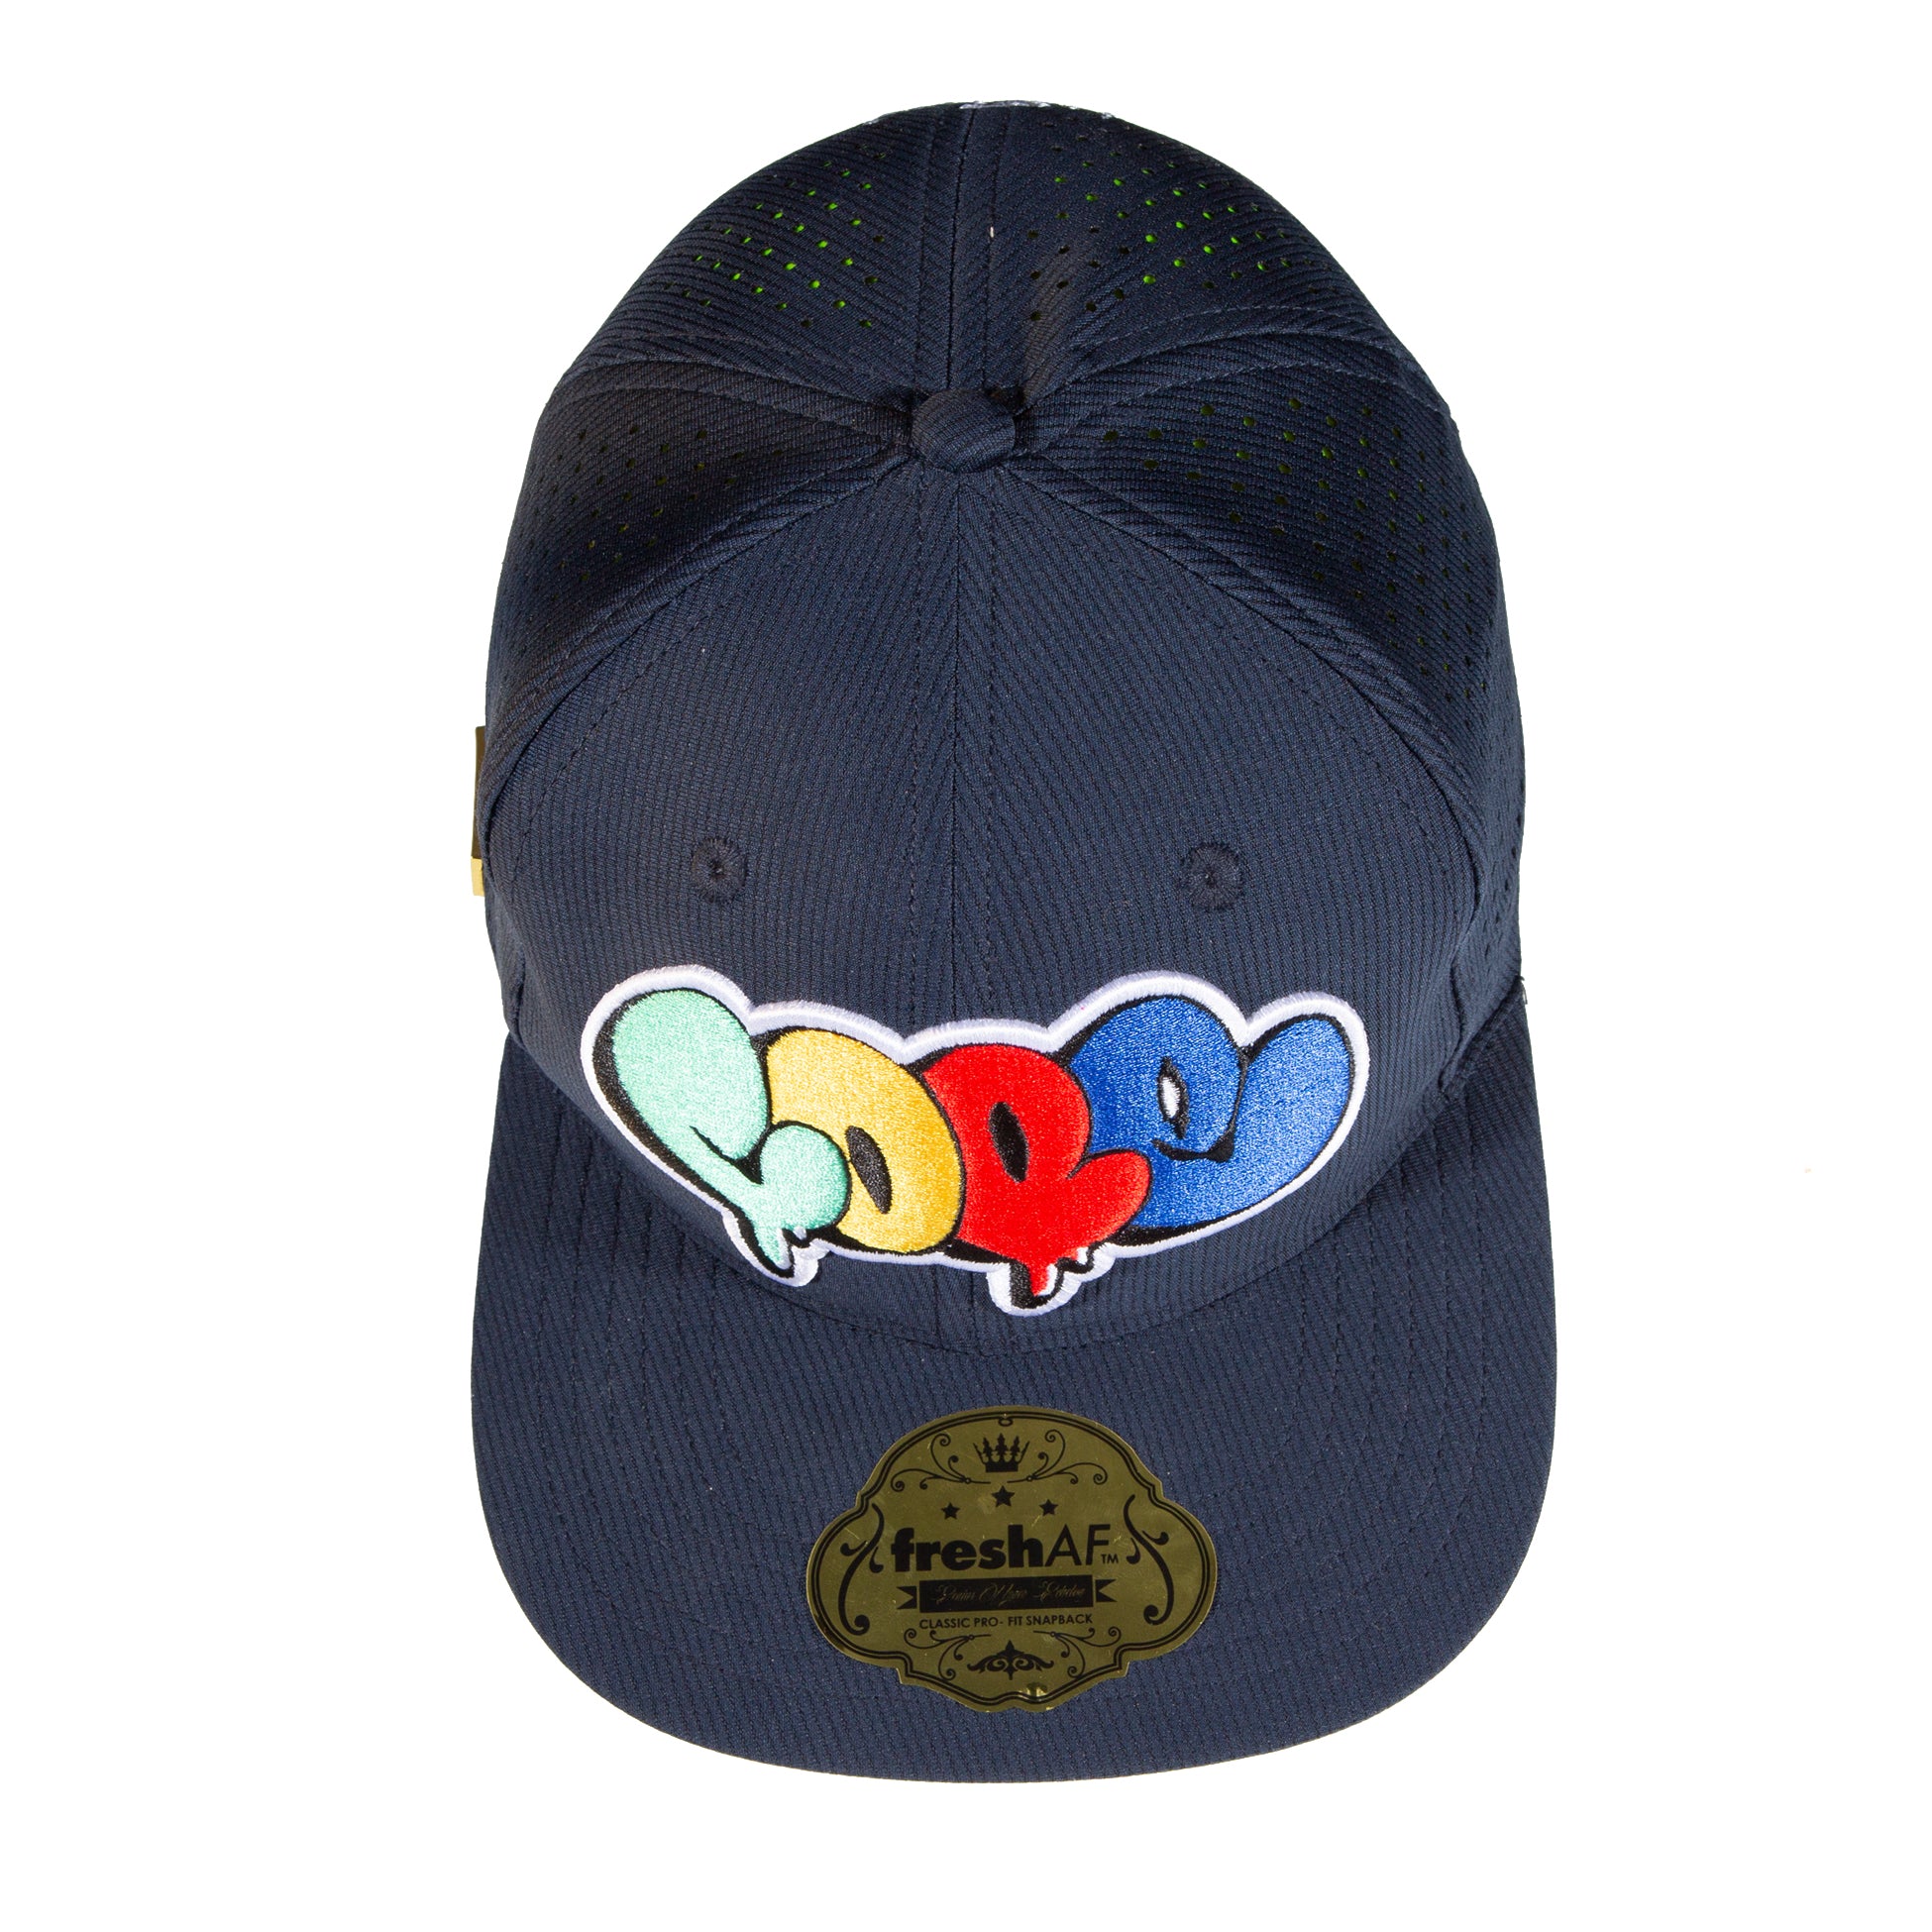 – Embroidery COPE Fresh Brand - AF 3D Nylon Navy/Mutil-color 2- - Mesh Cap